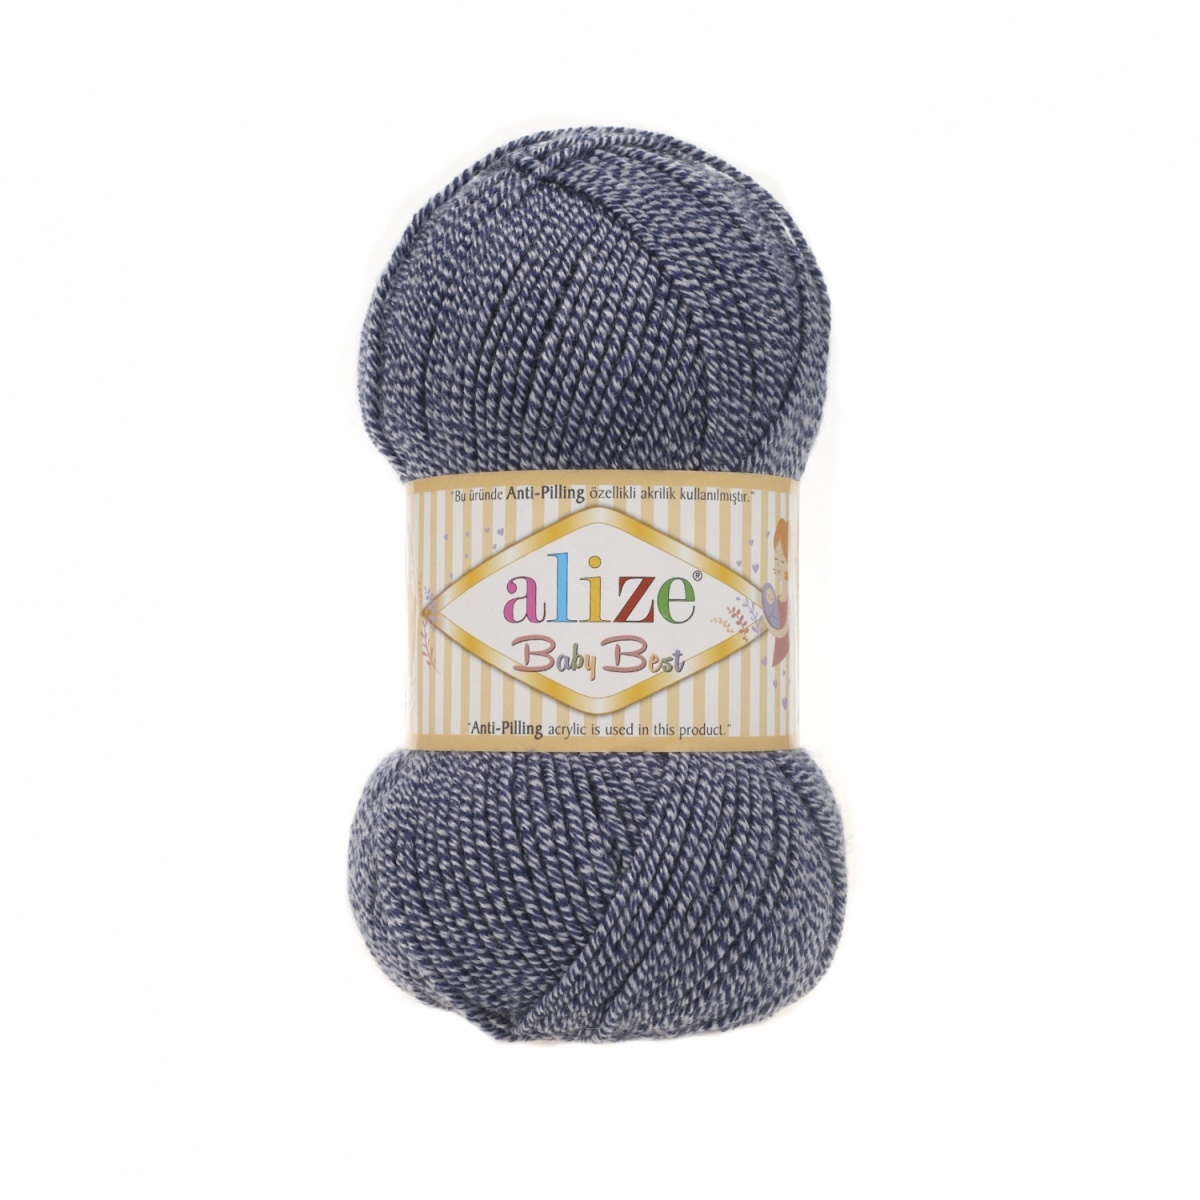 Alize Baby Best, 90% acrylic, 10% bamboo 5 Skein Value Pack, 500g фото 18